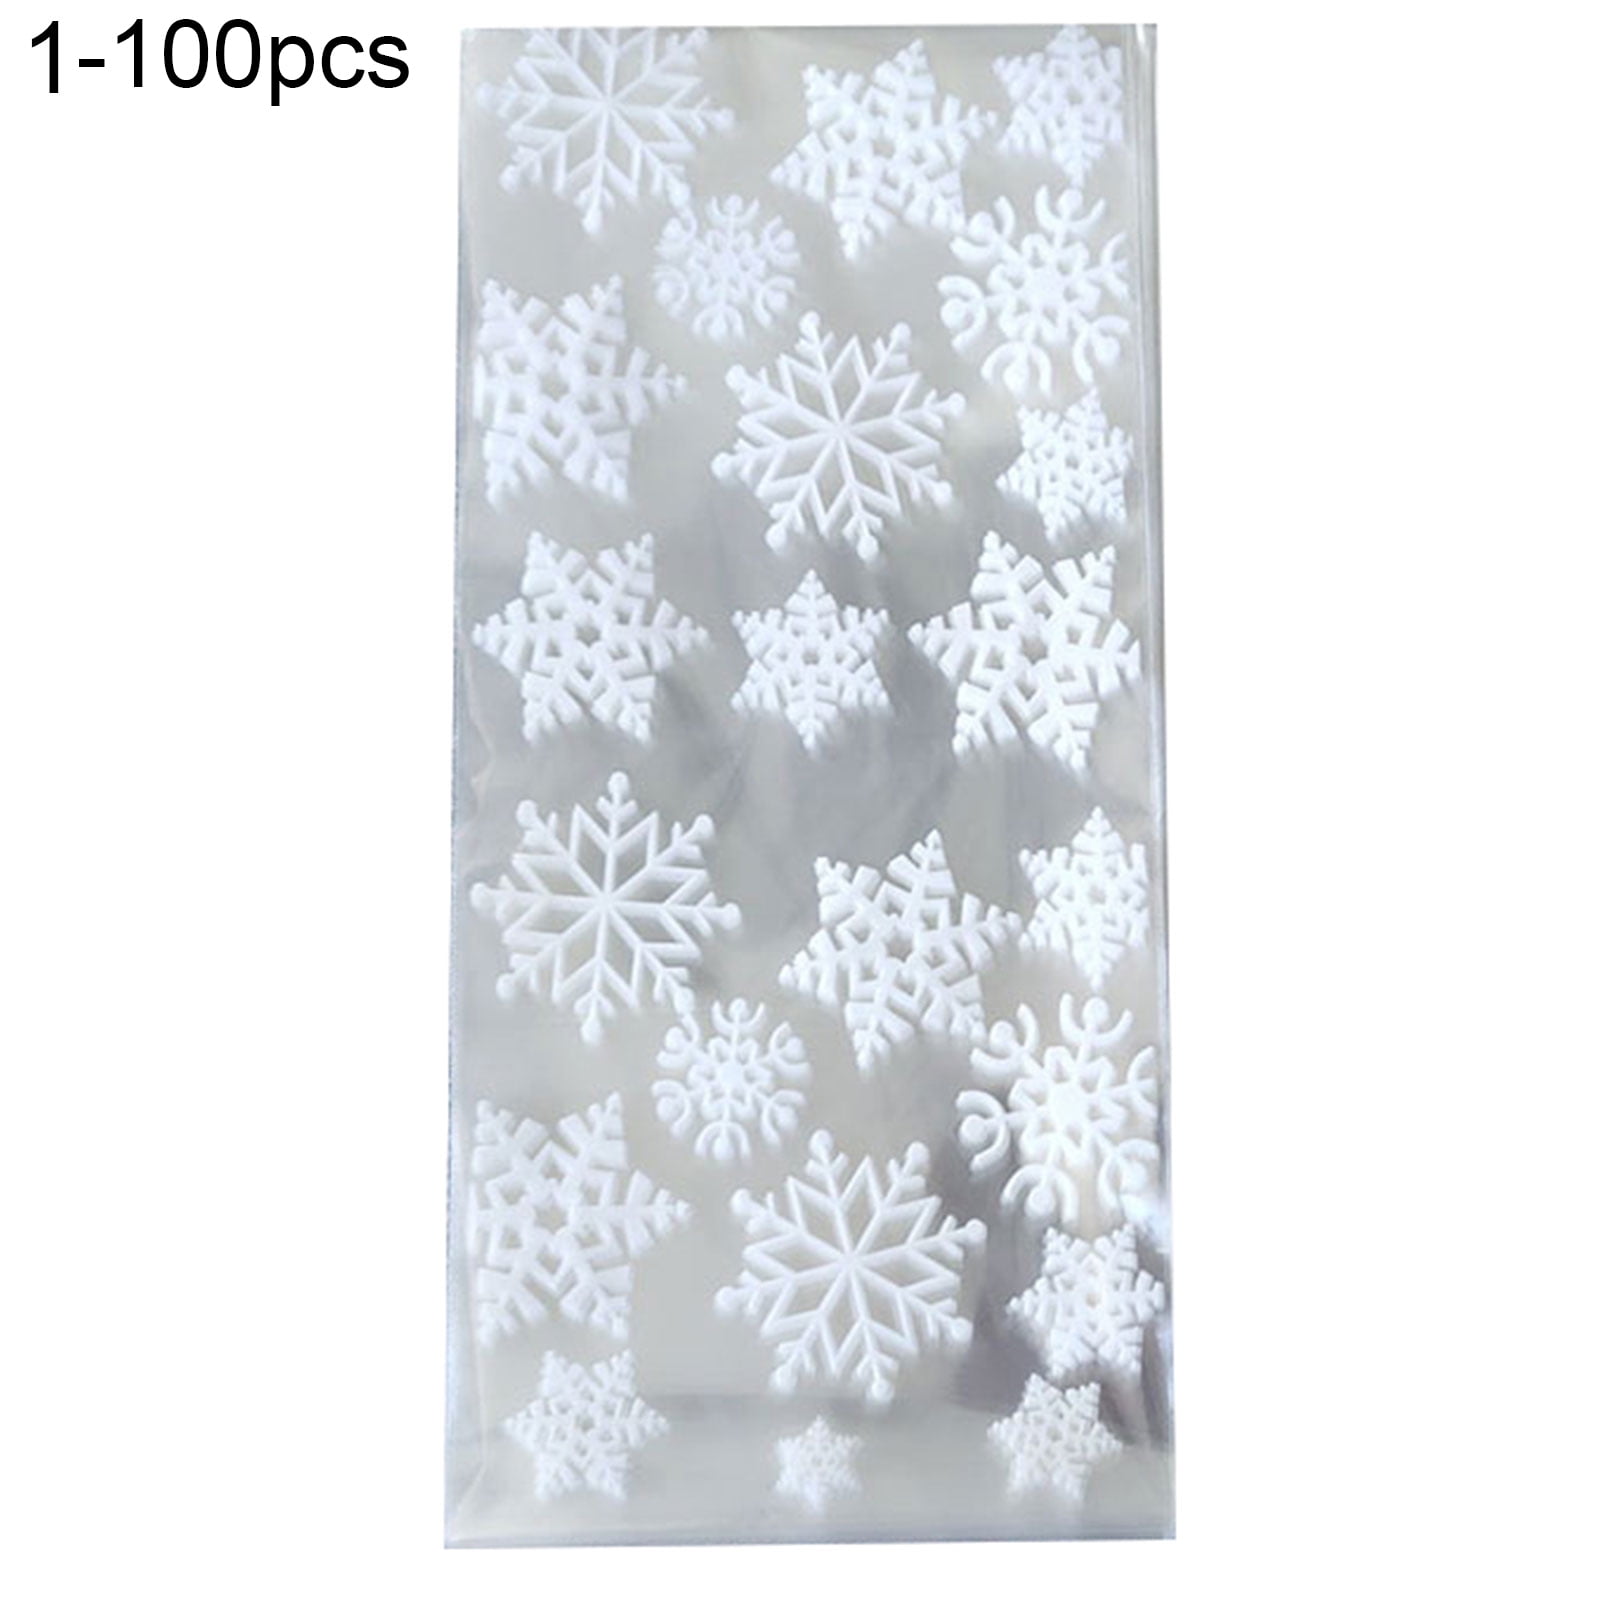 100pcs Snowflake Patterned Packaging Bags For Diy Candy & Baking Packaging